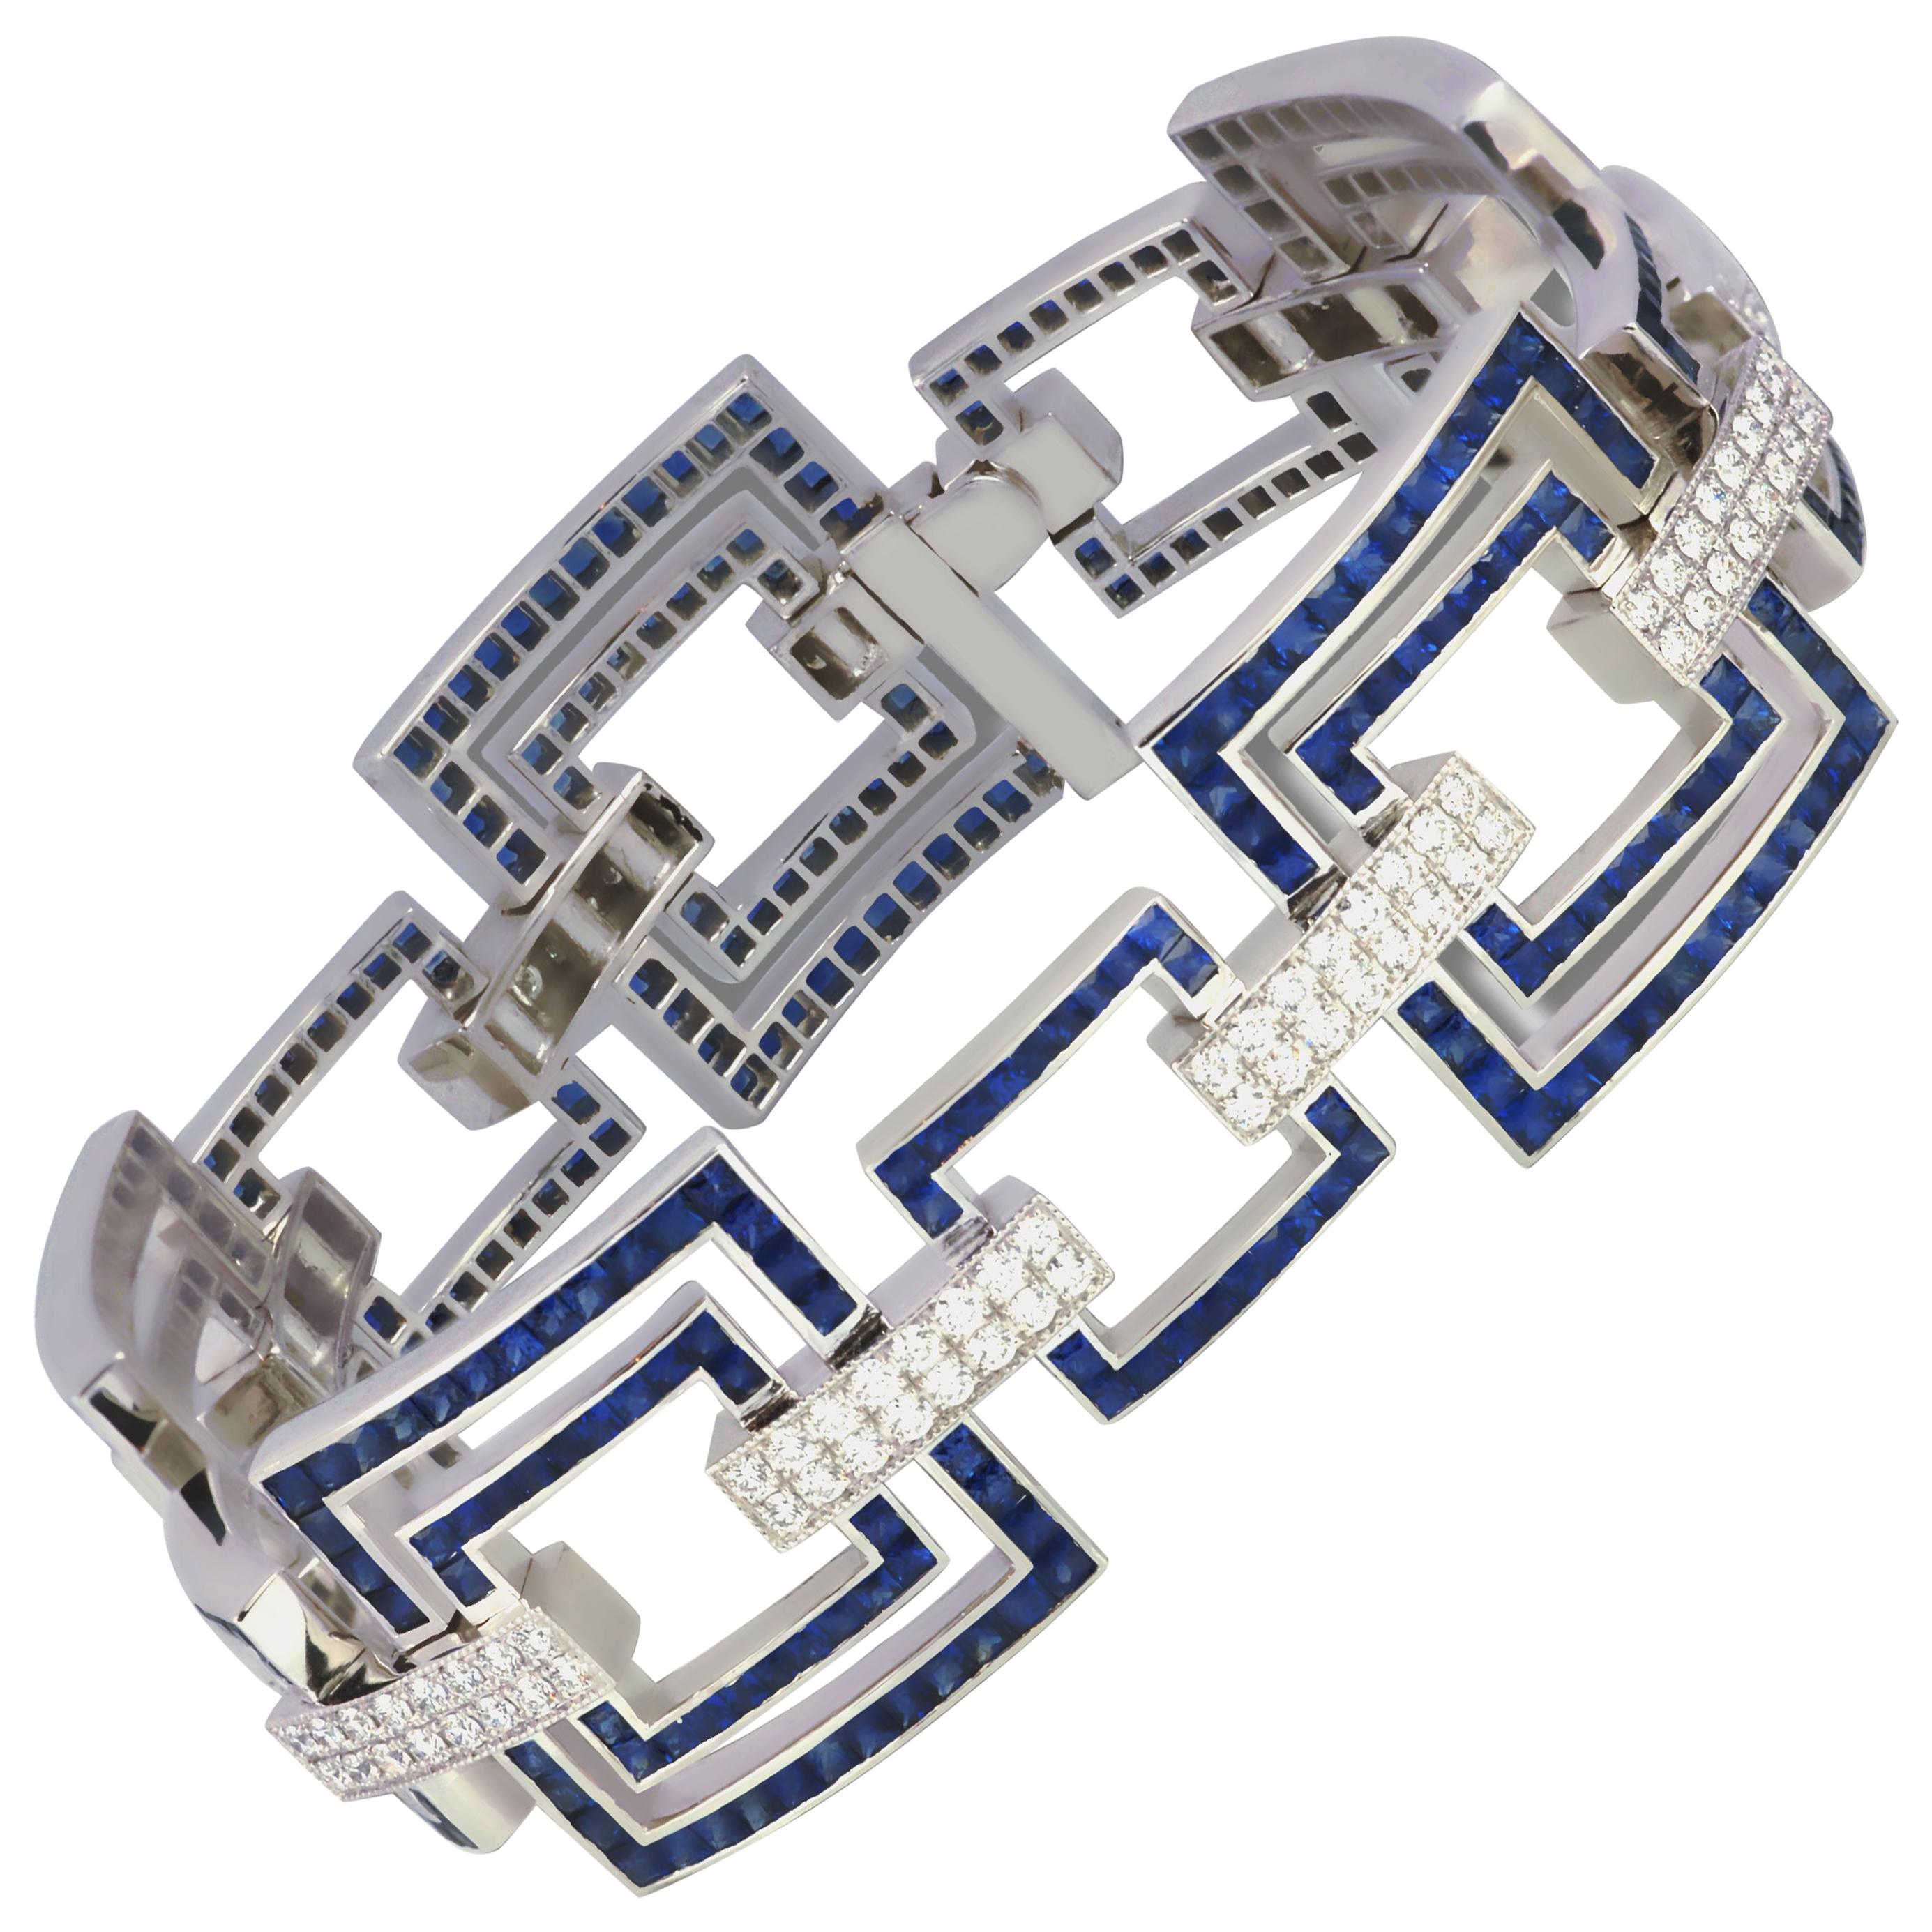 Blue Sapphire 13.43 Cts with Diamond 2.13 Cts Bracelet in 18k White Gold Setting